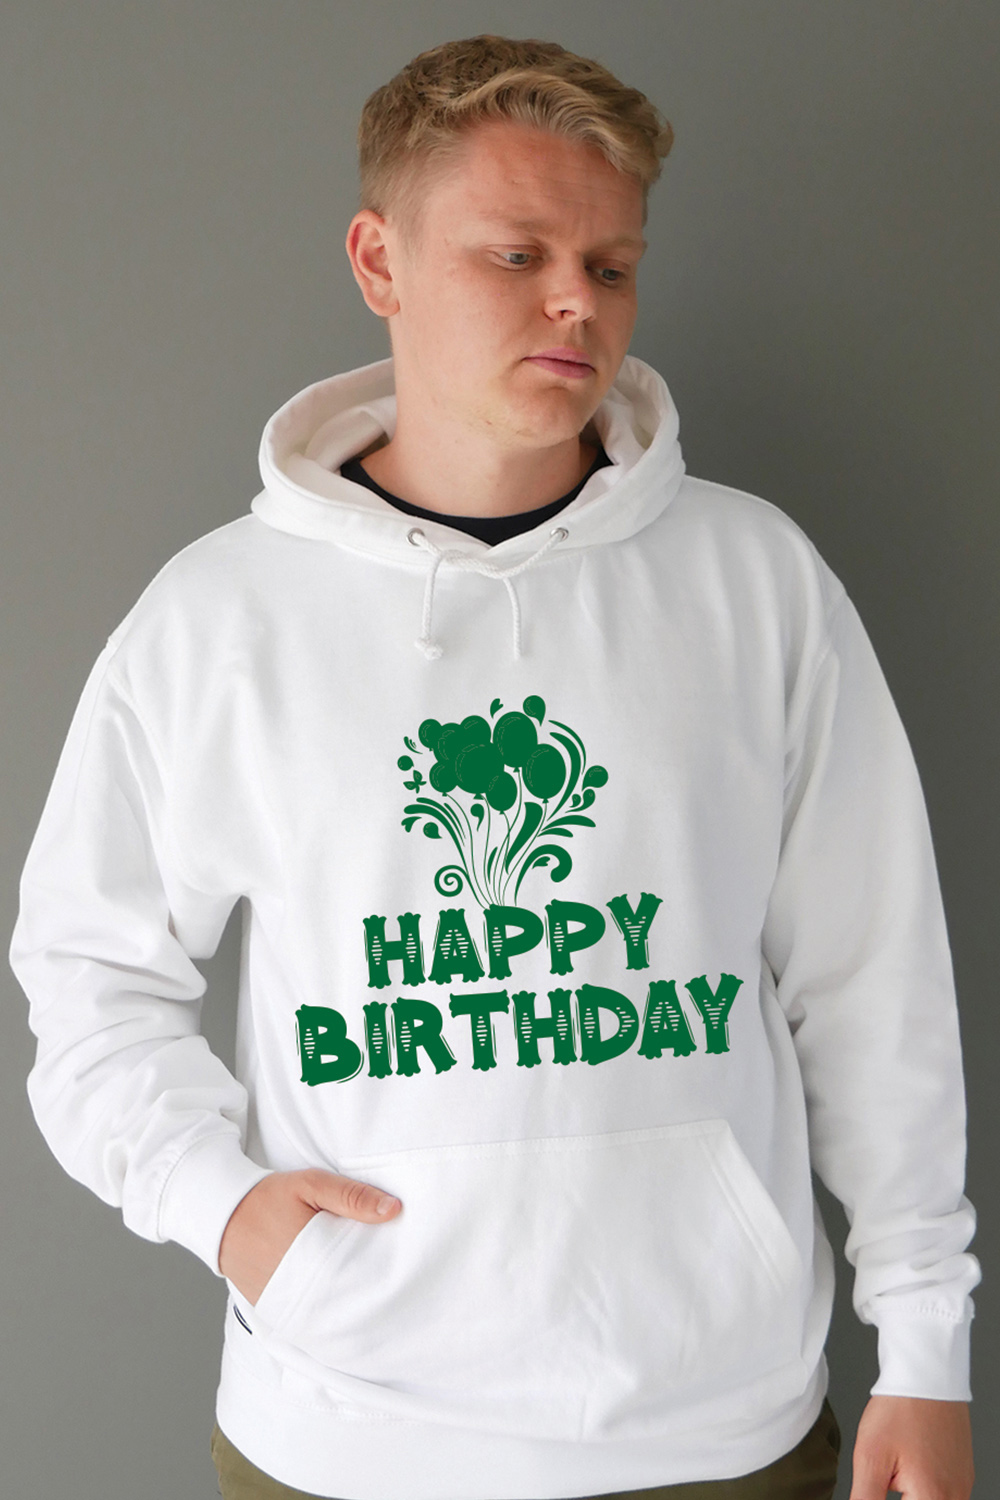 happy birthday and t shirt logo design pinterest preview image.